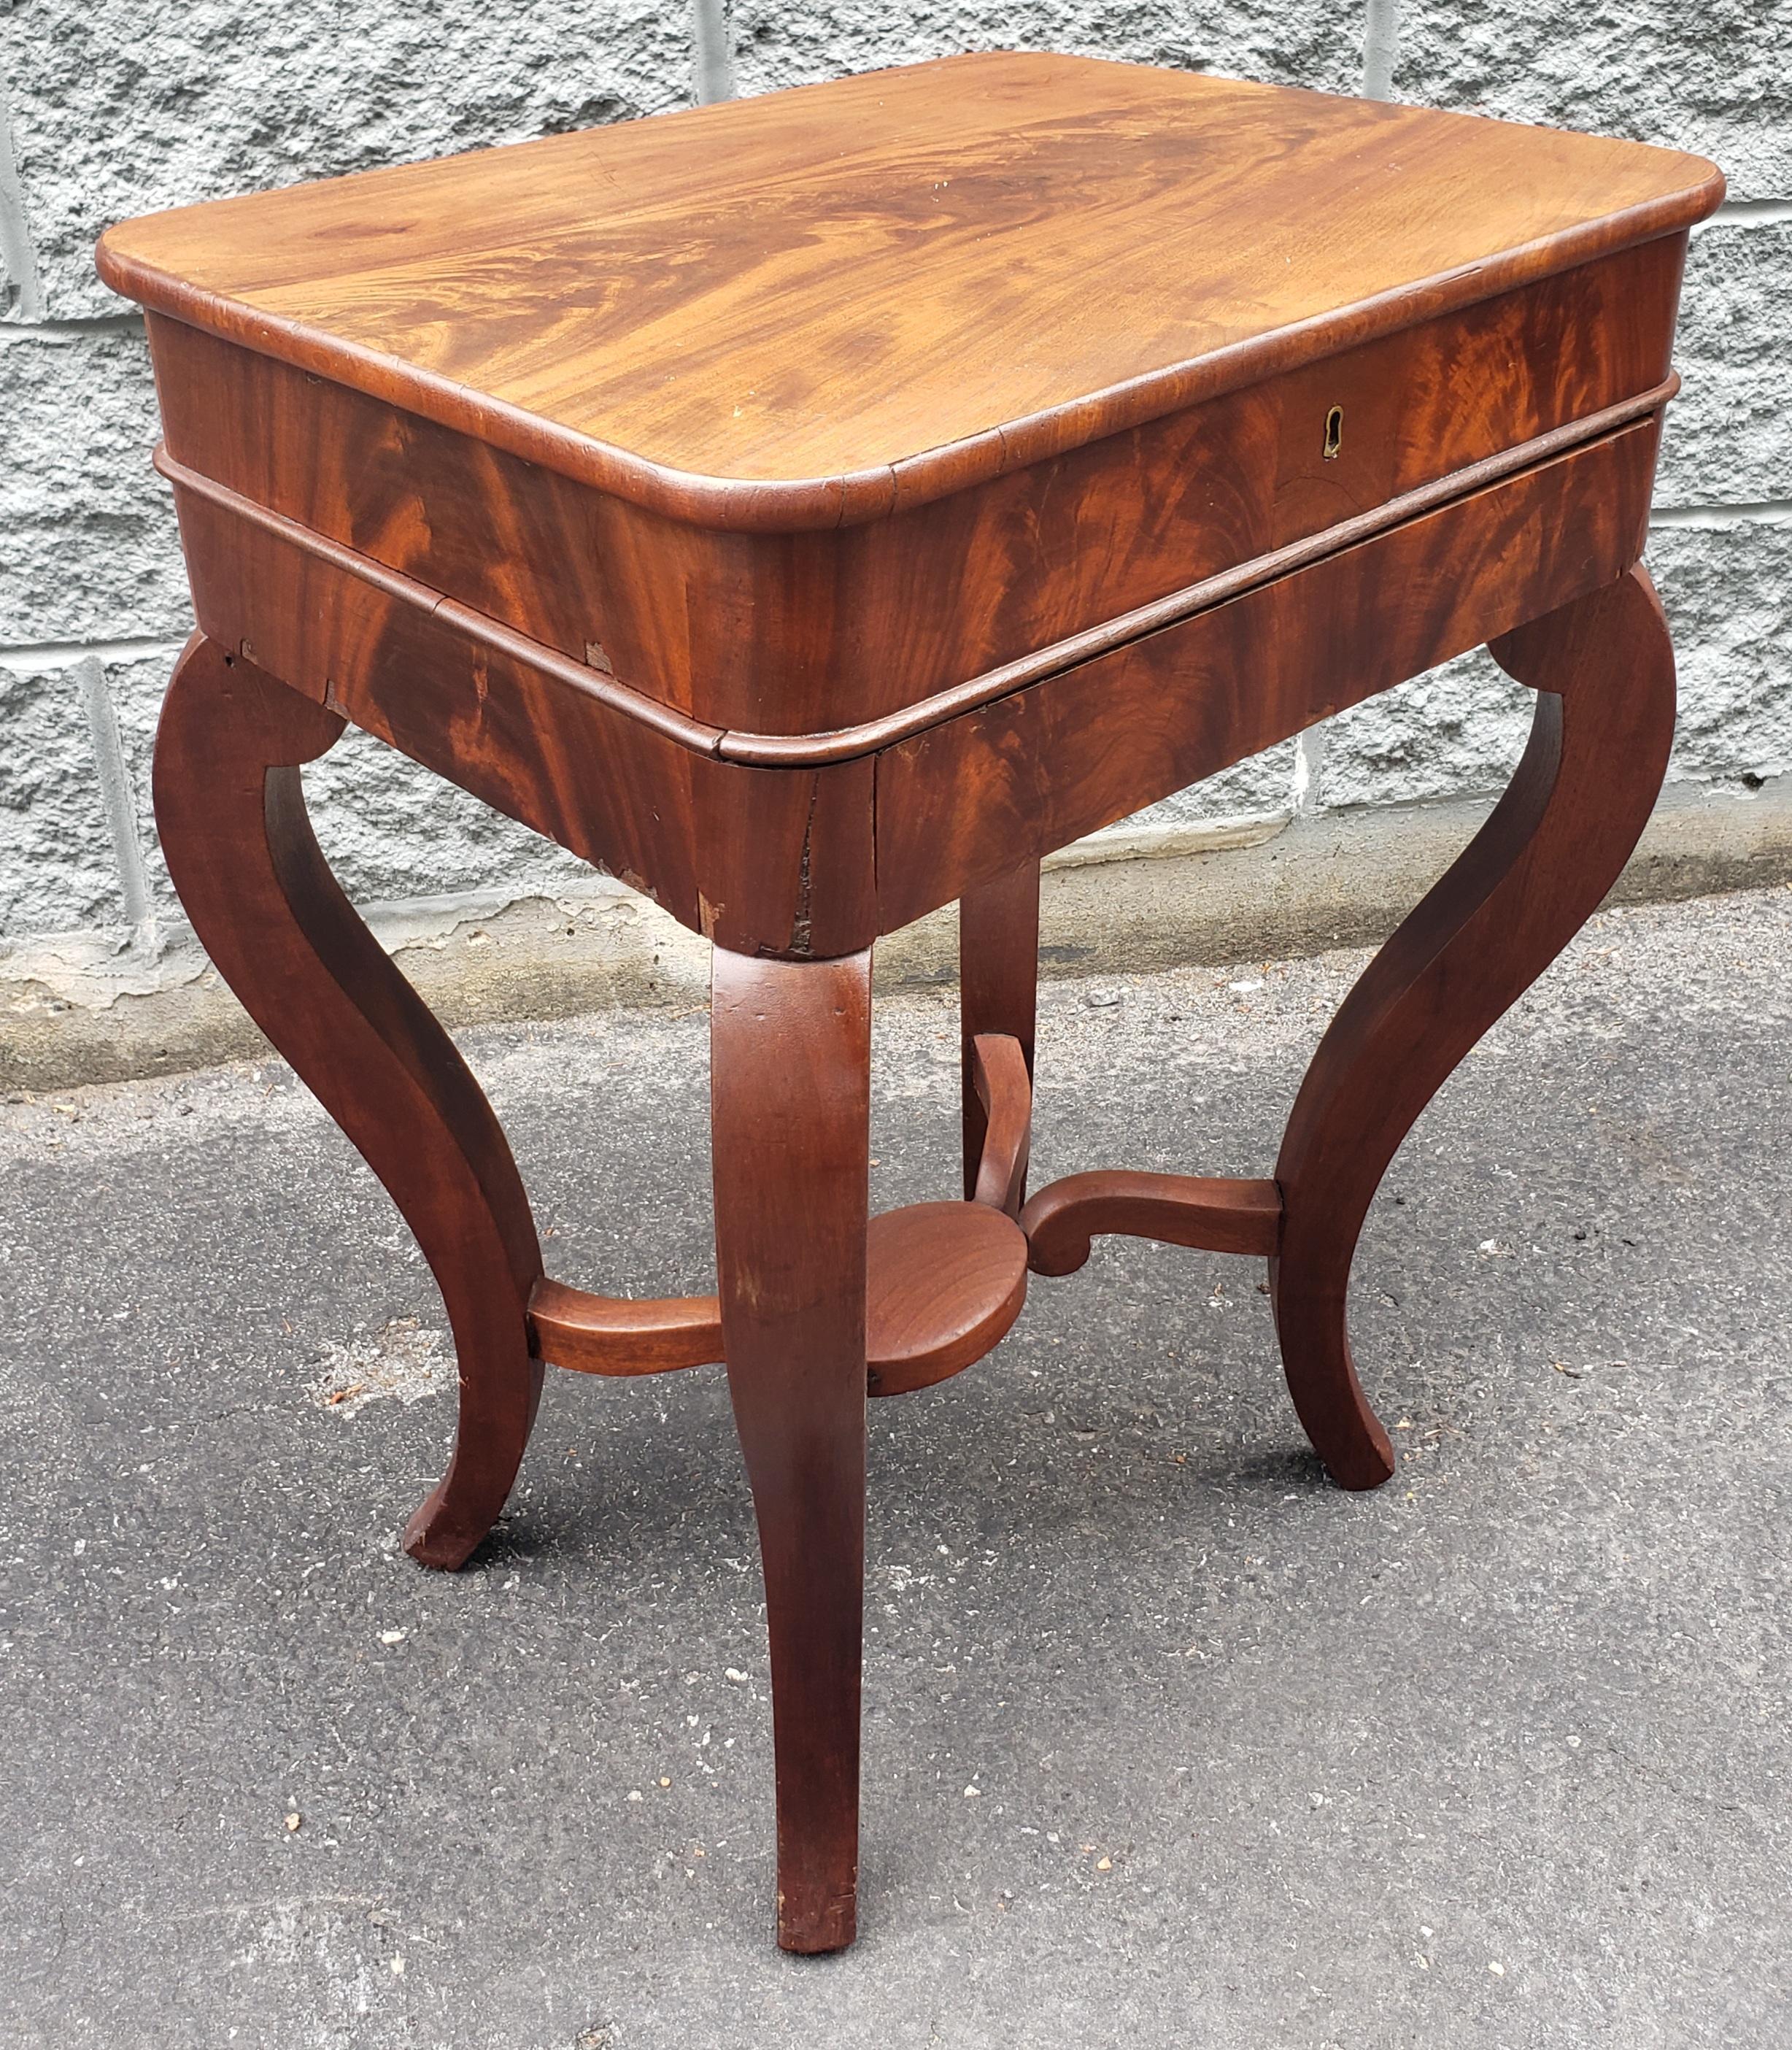 19th Century American Empire One-Drawer Flame Mahogany Sewing or Work Table For Sale 3